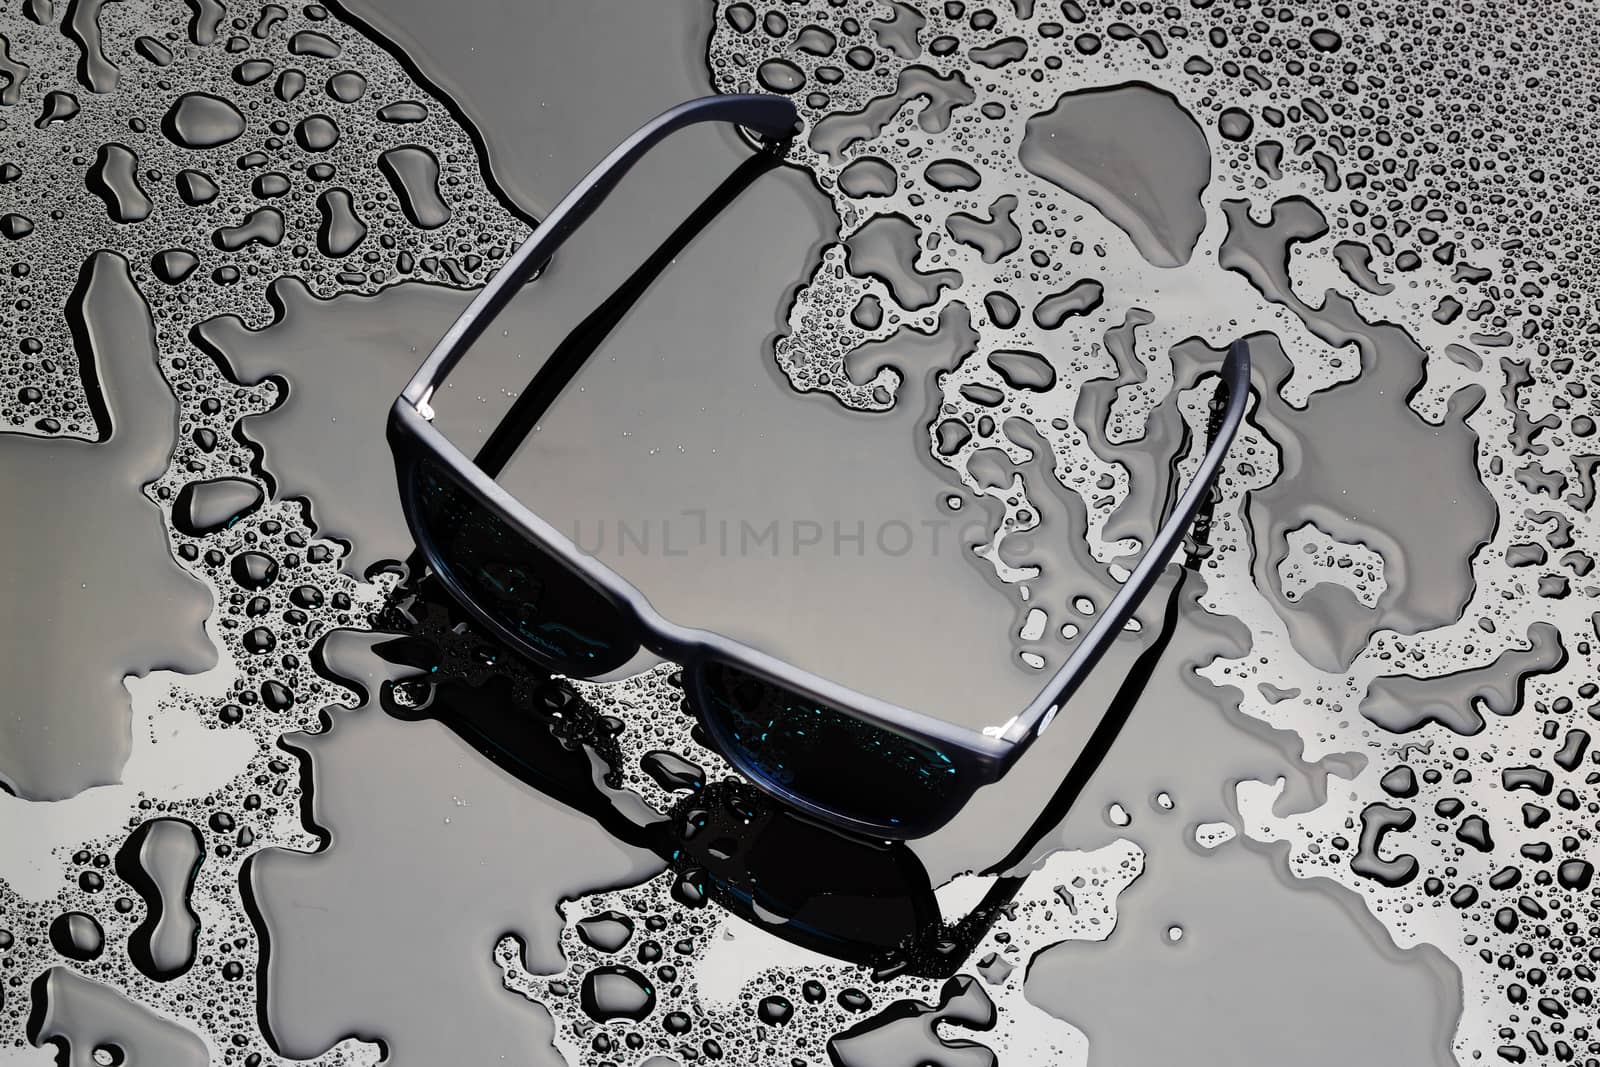 A pair of sunglasses on a black wet surface with water